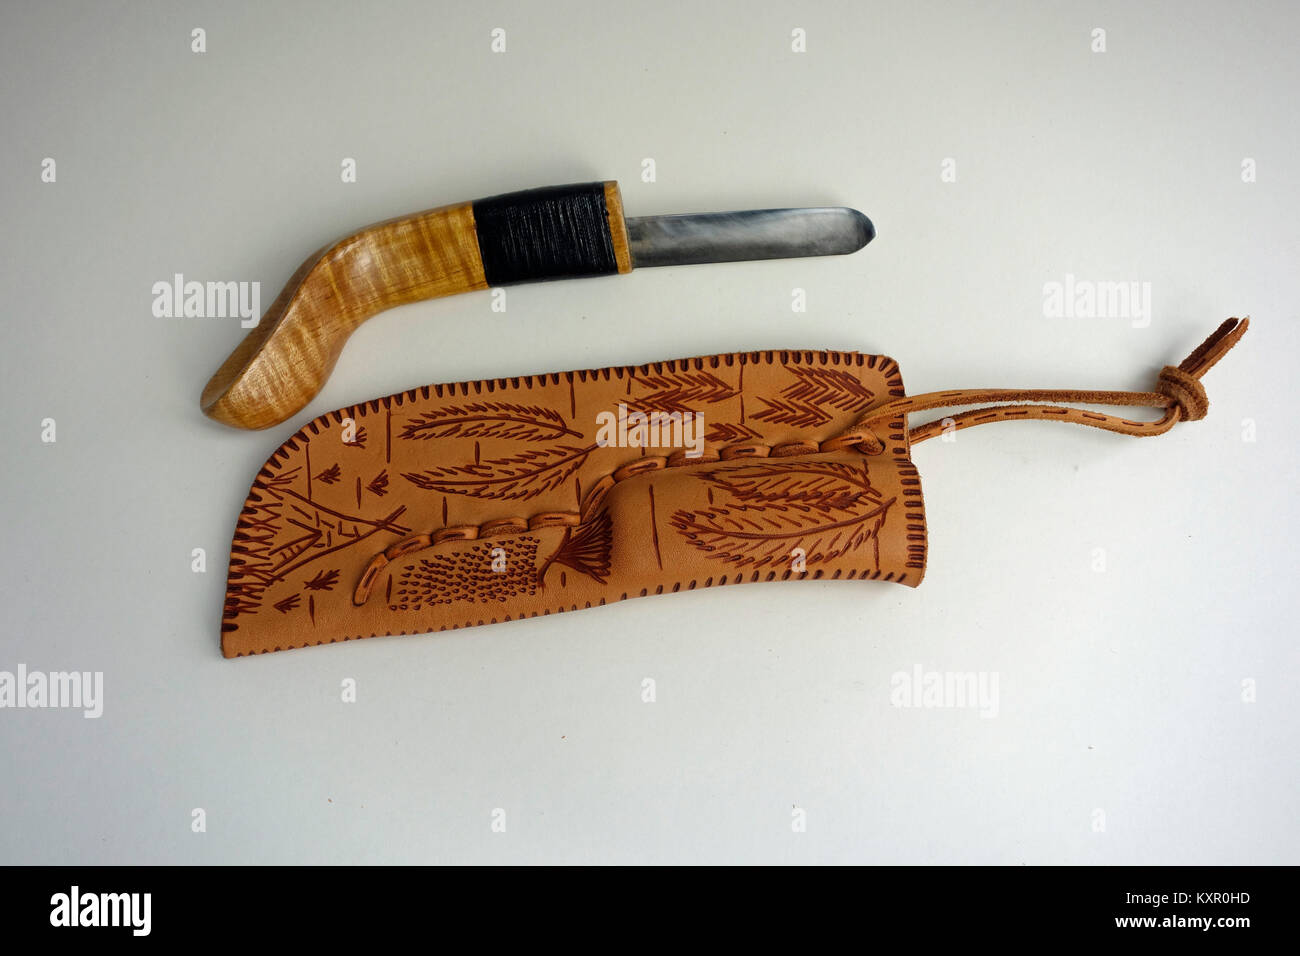 A crooked knife made by Mi'Kmaq aboriginals in Canada Stock Photo